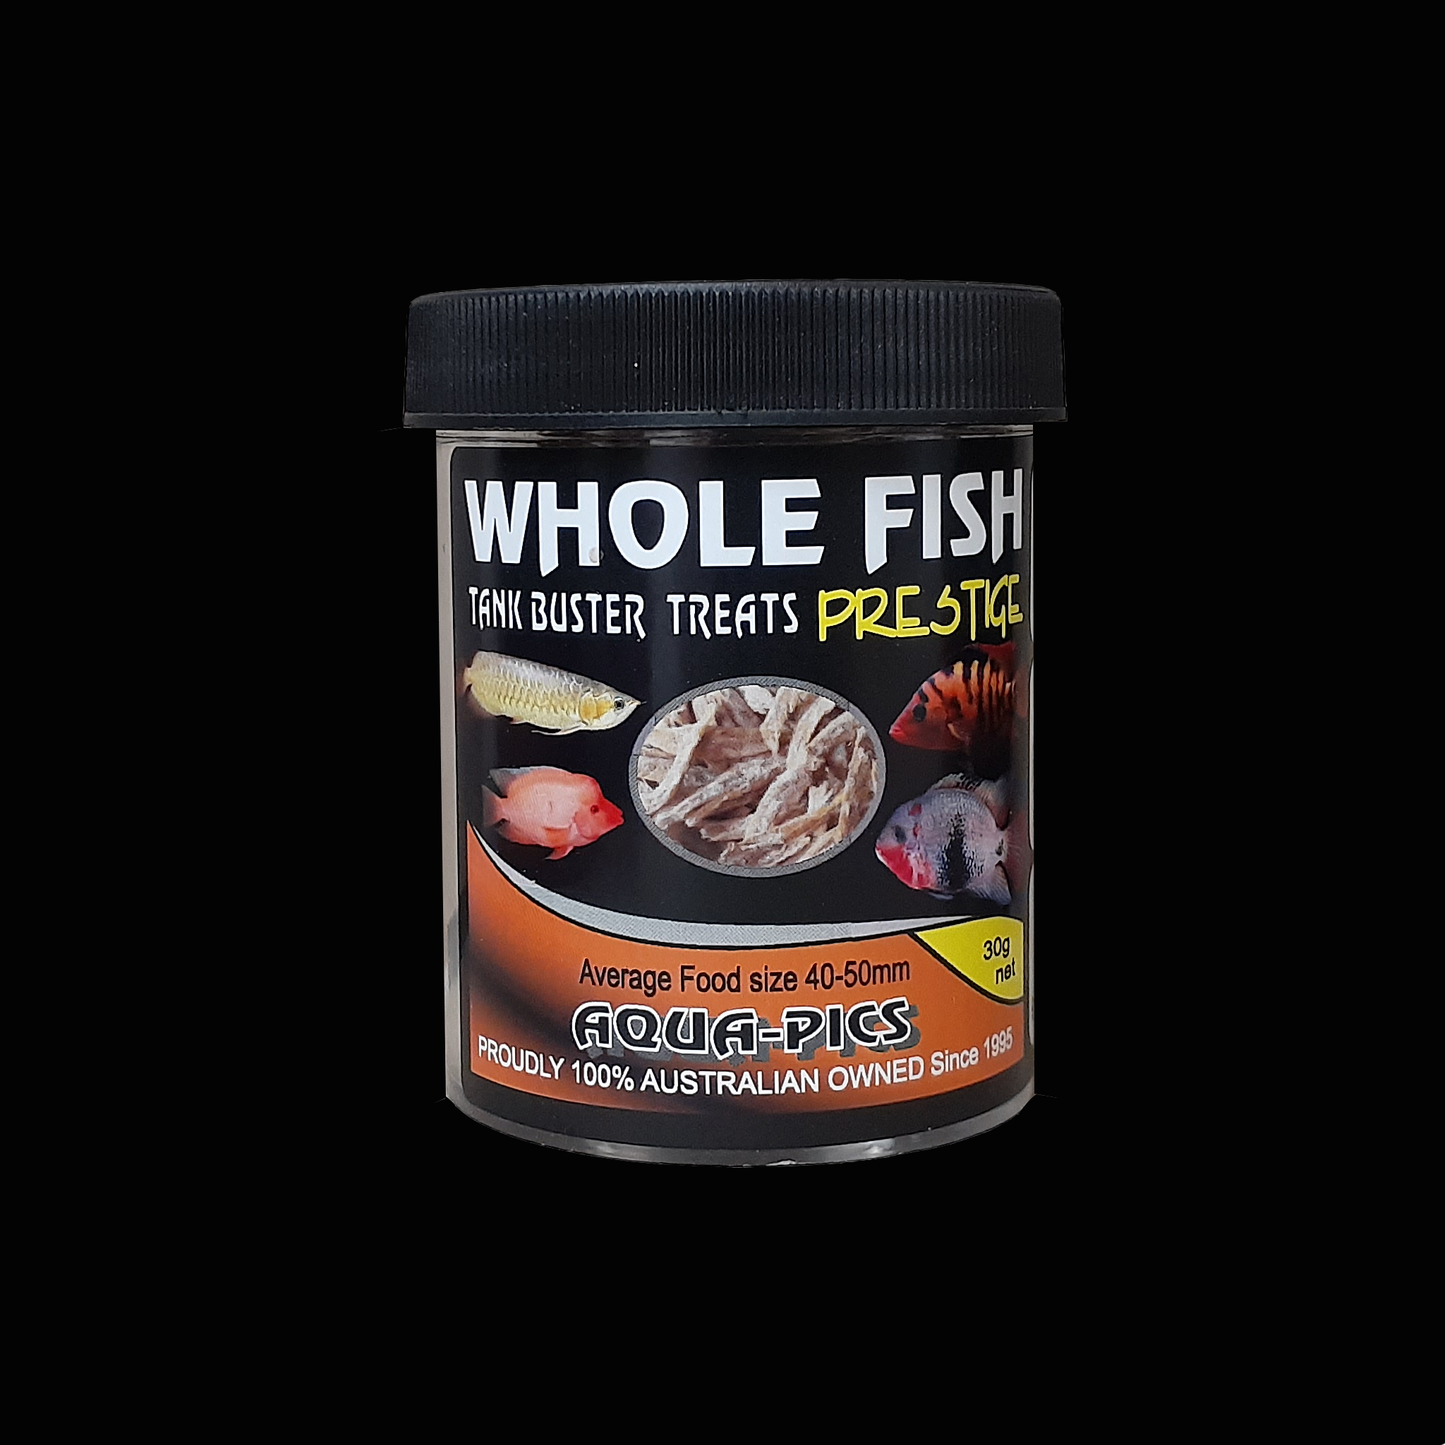 Whole Fish Tank Busters 30g High protein food